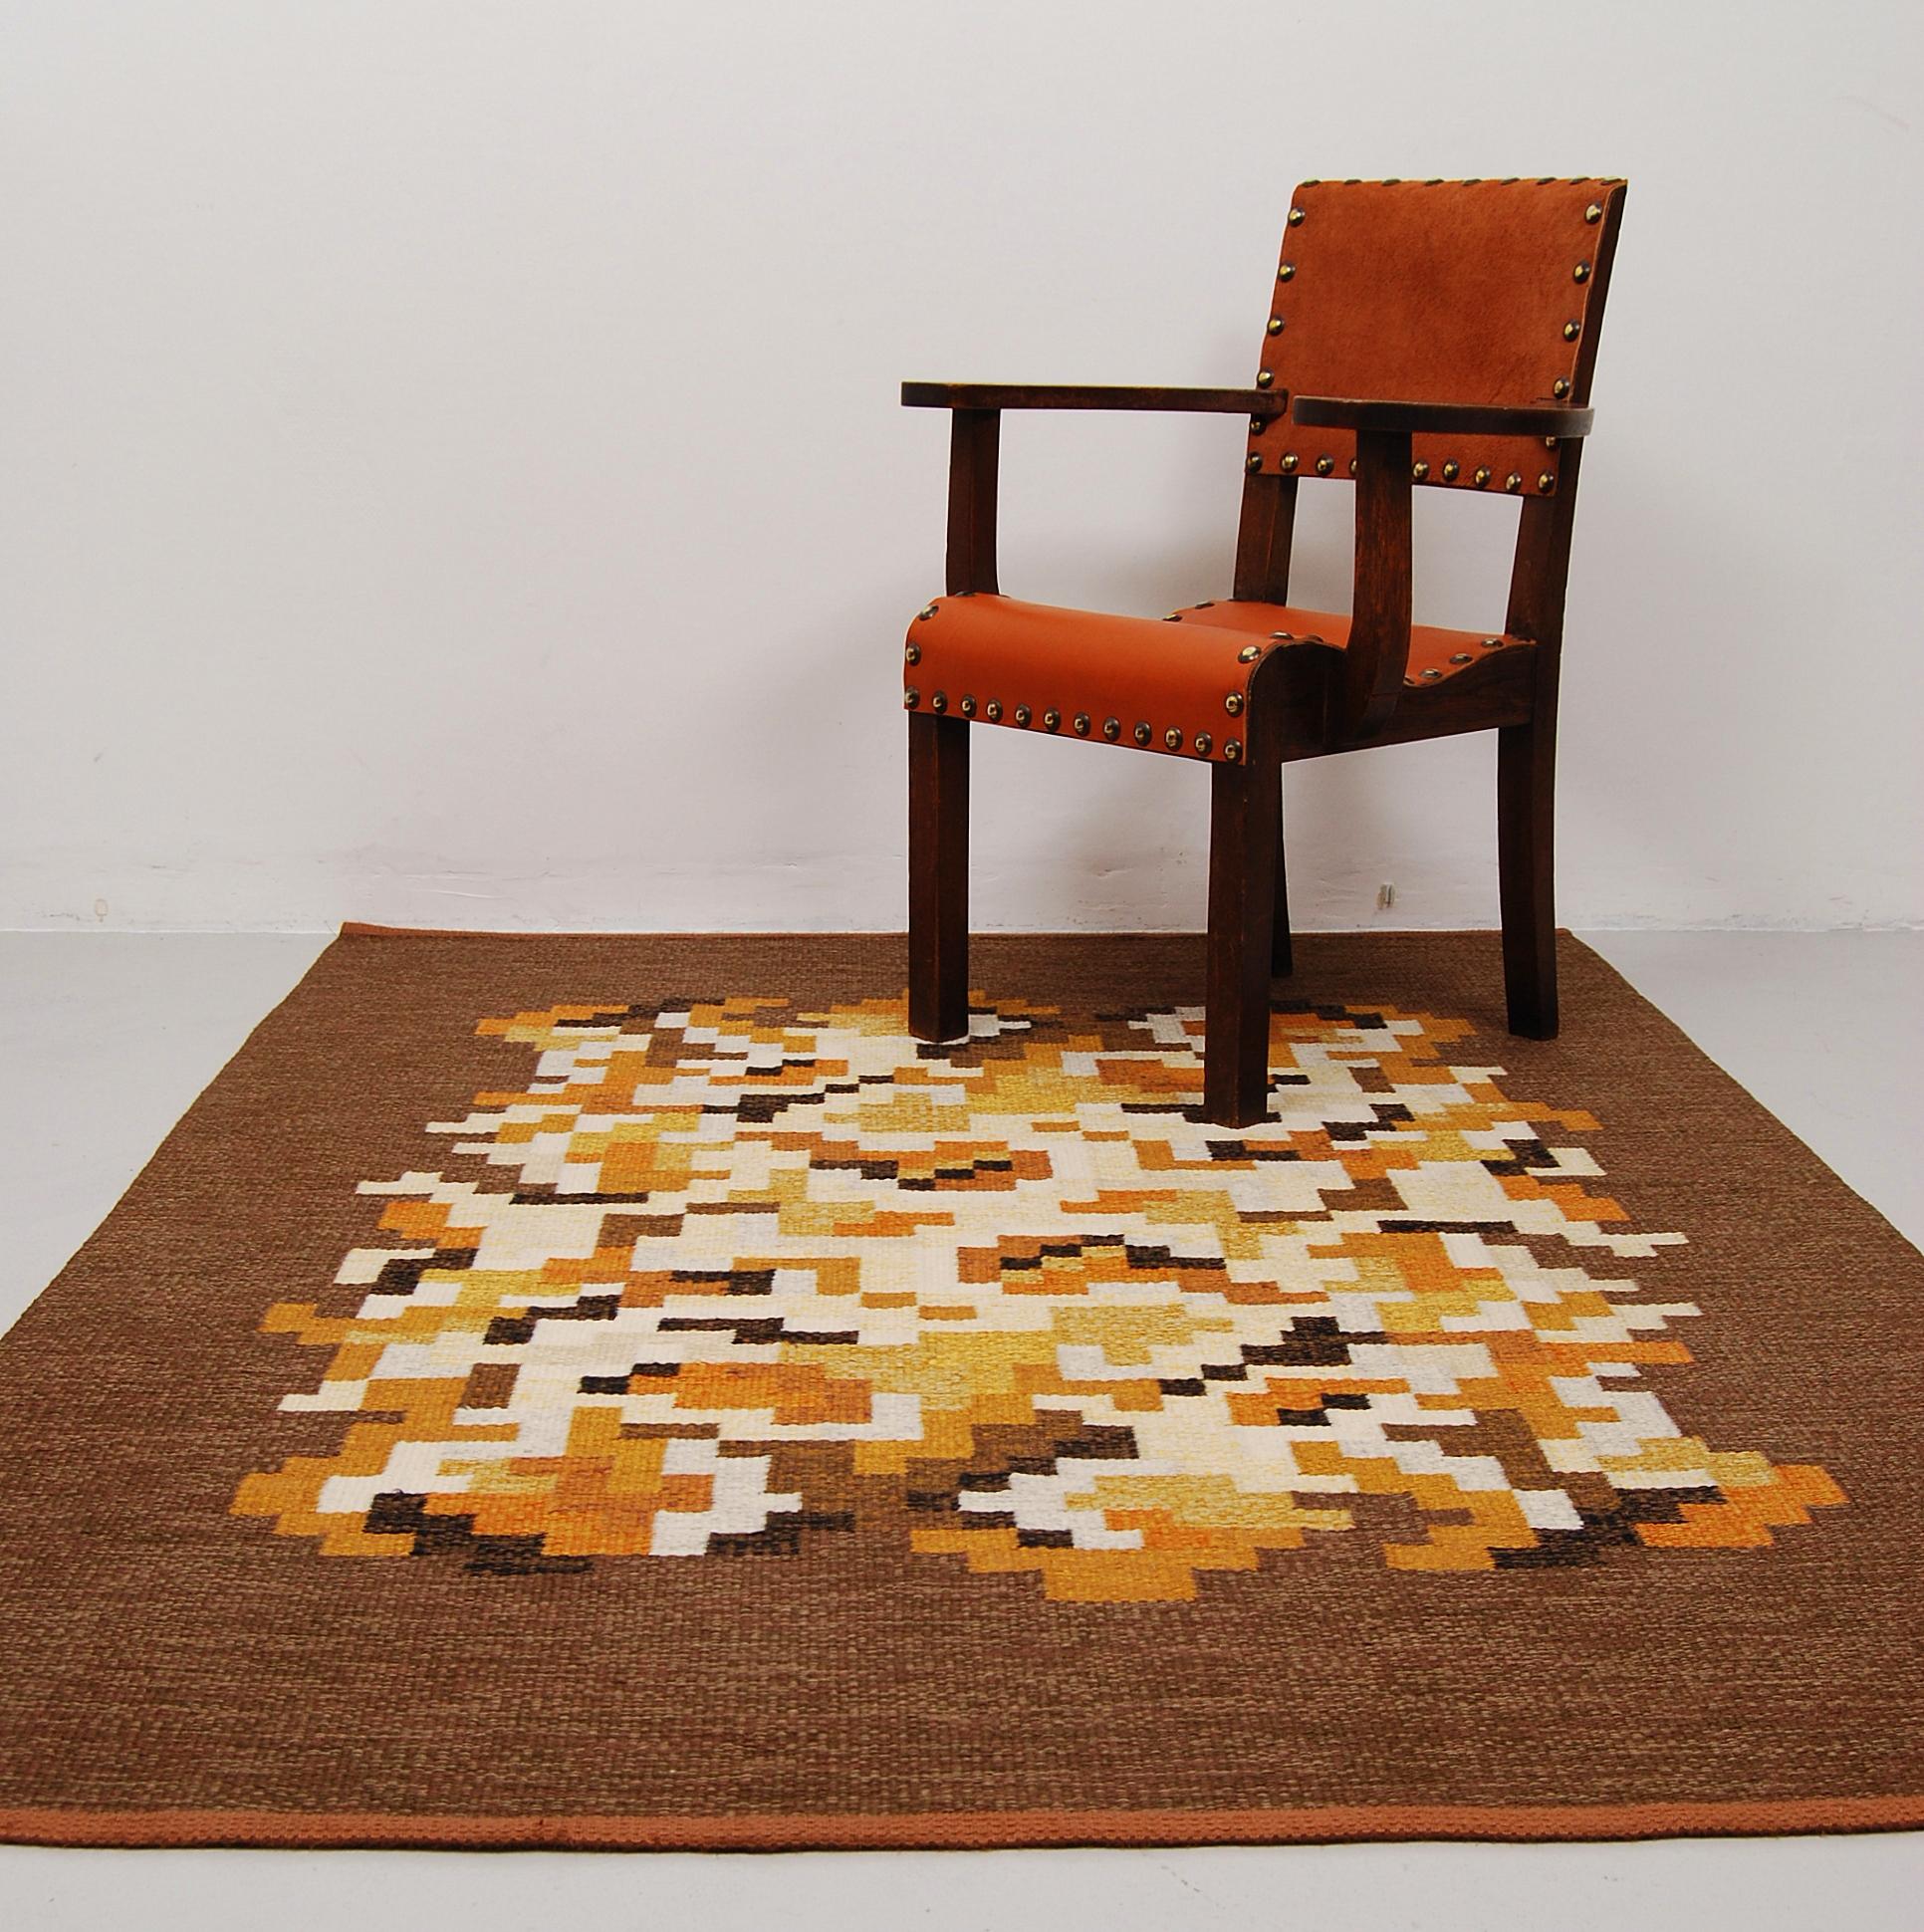 Vintage Swedish flat-weave carpet “Korall” by Erik Lundberg for Vävaregården i Eringsboda, Sweden. Fields in beige, white, black, yellow and orange. Handwoven in wool and signed with monogram. This carpet is in very good vintage condition with no